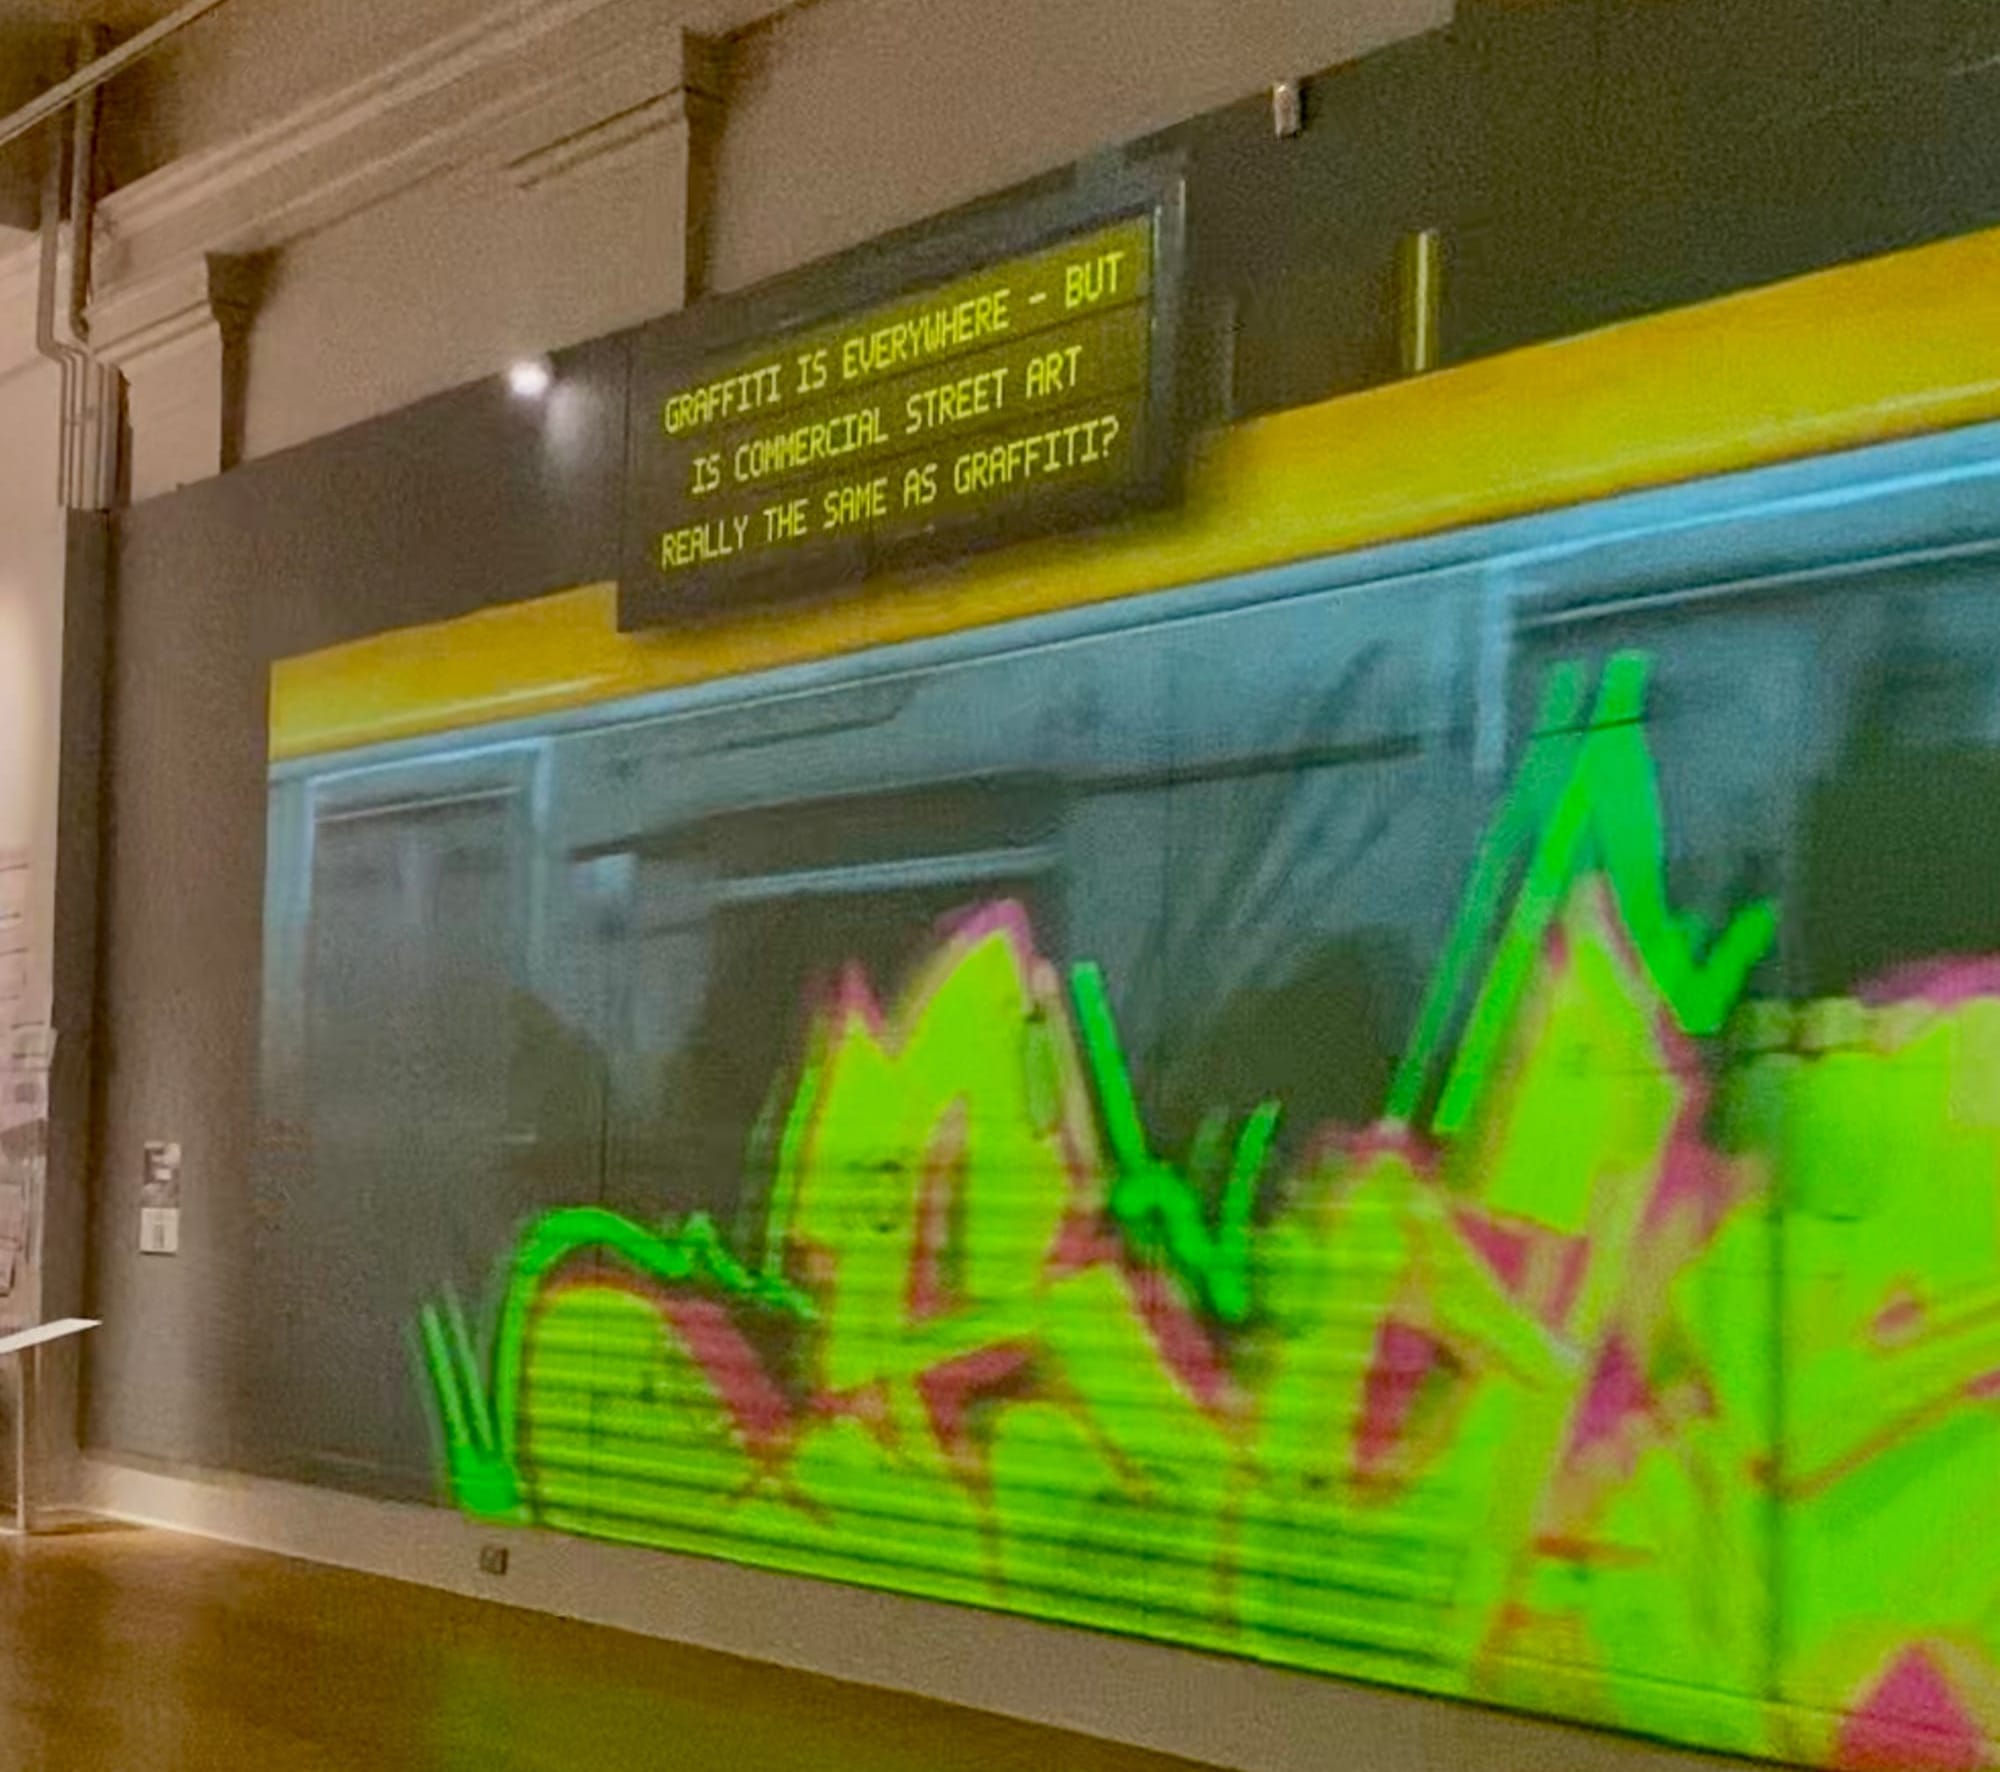 A street art subway train with a sign above it which reads 'Graffiti is everywhere - but is commercial street art really the same as graffiti?'